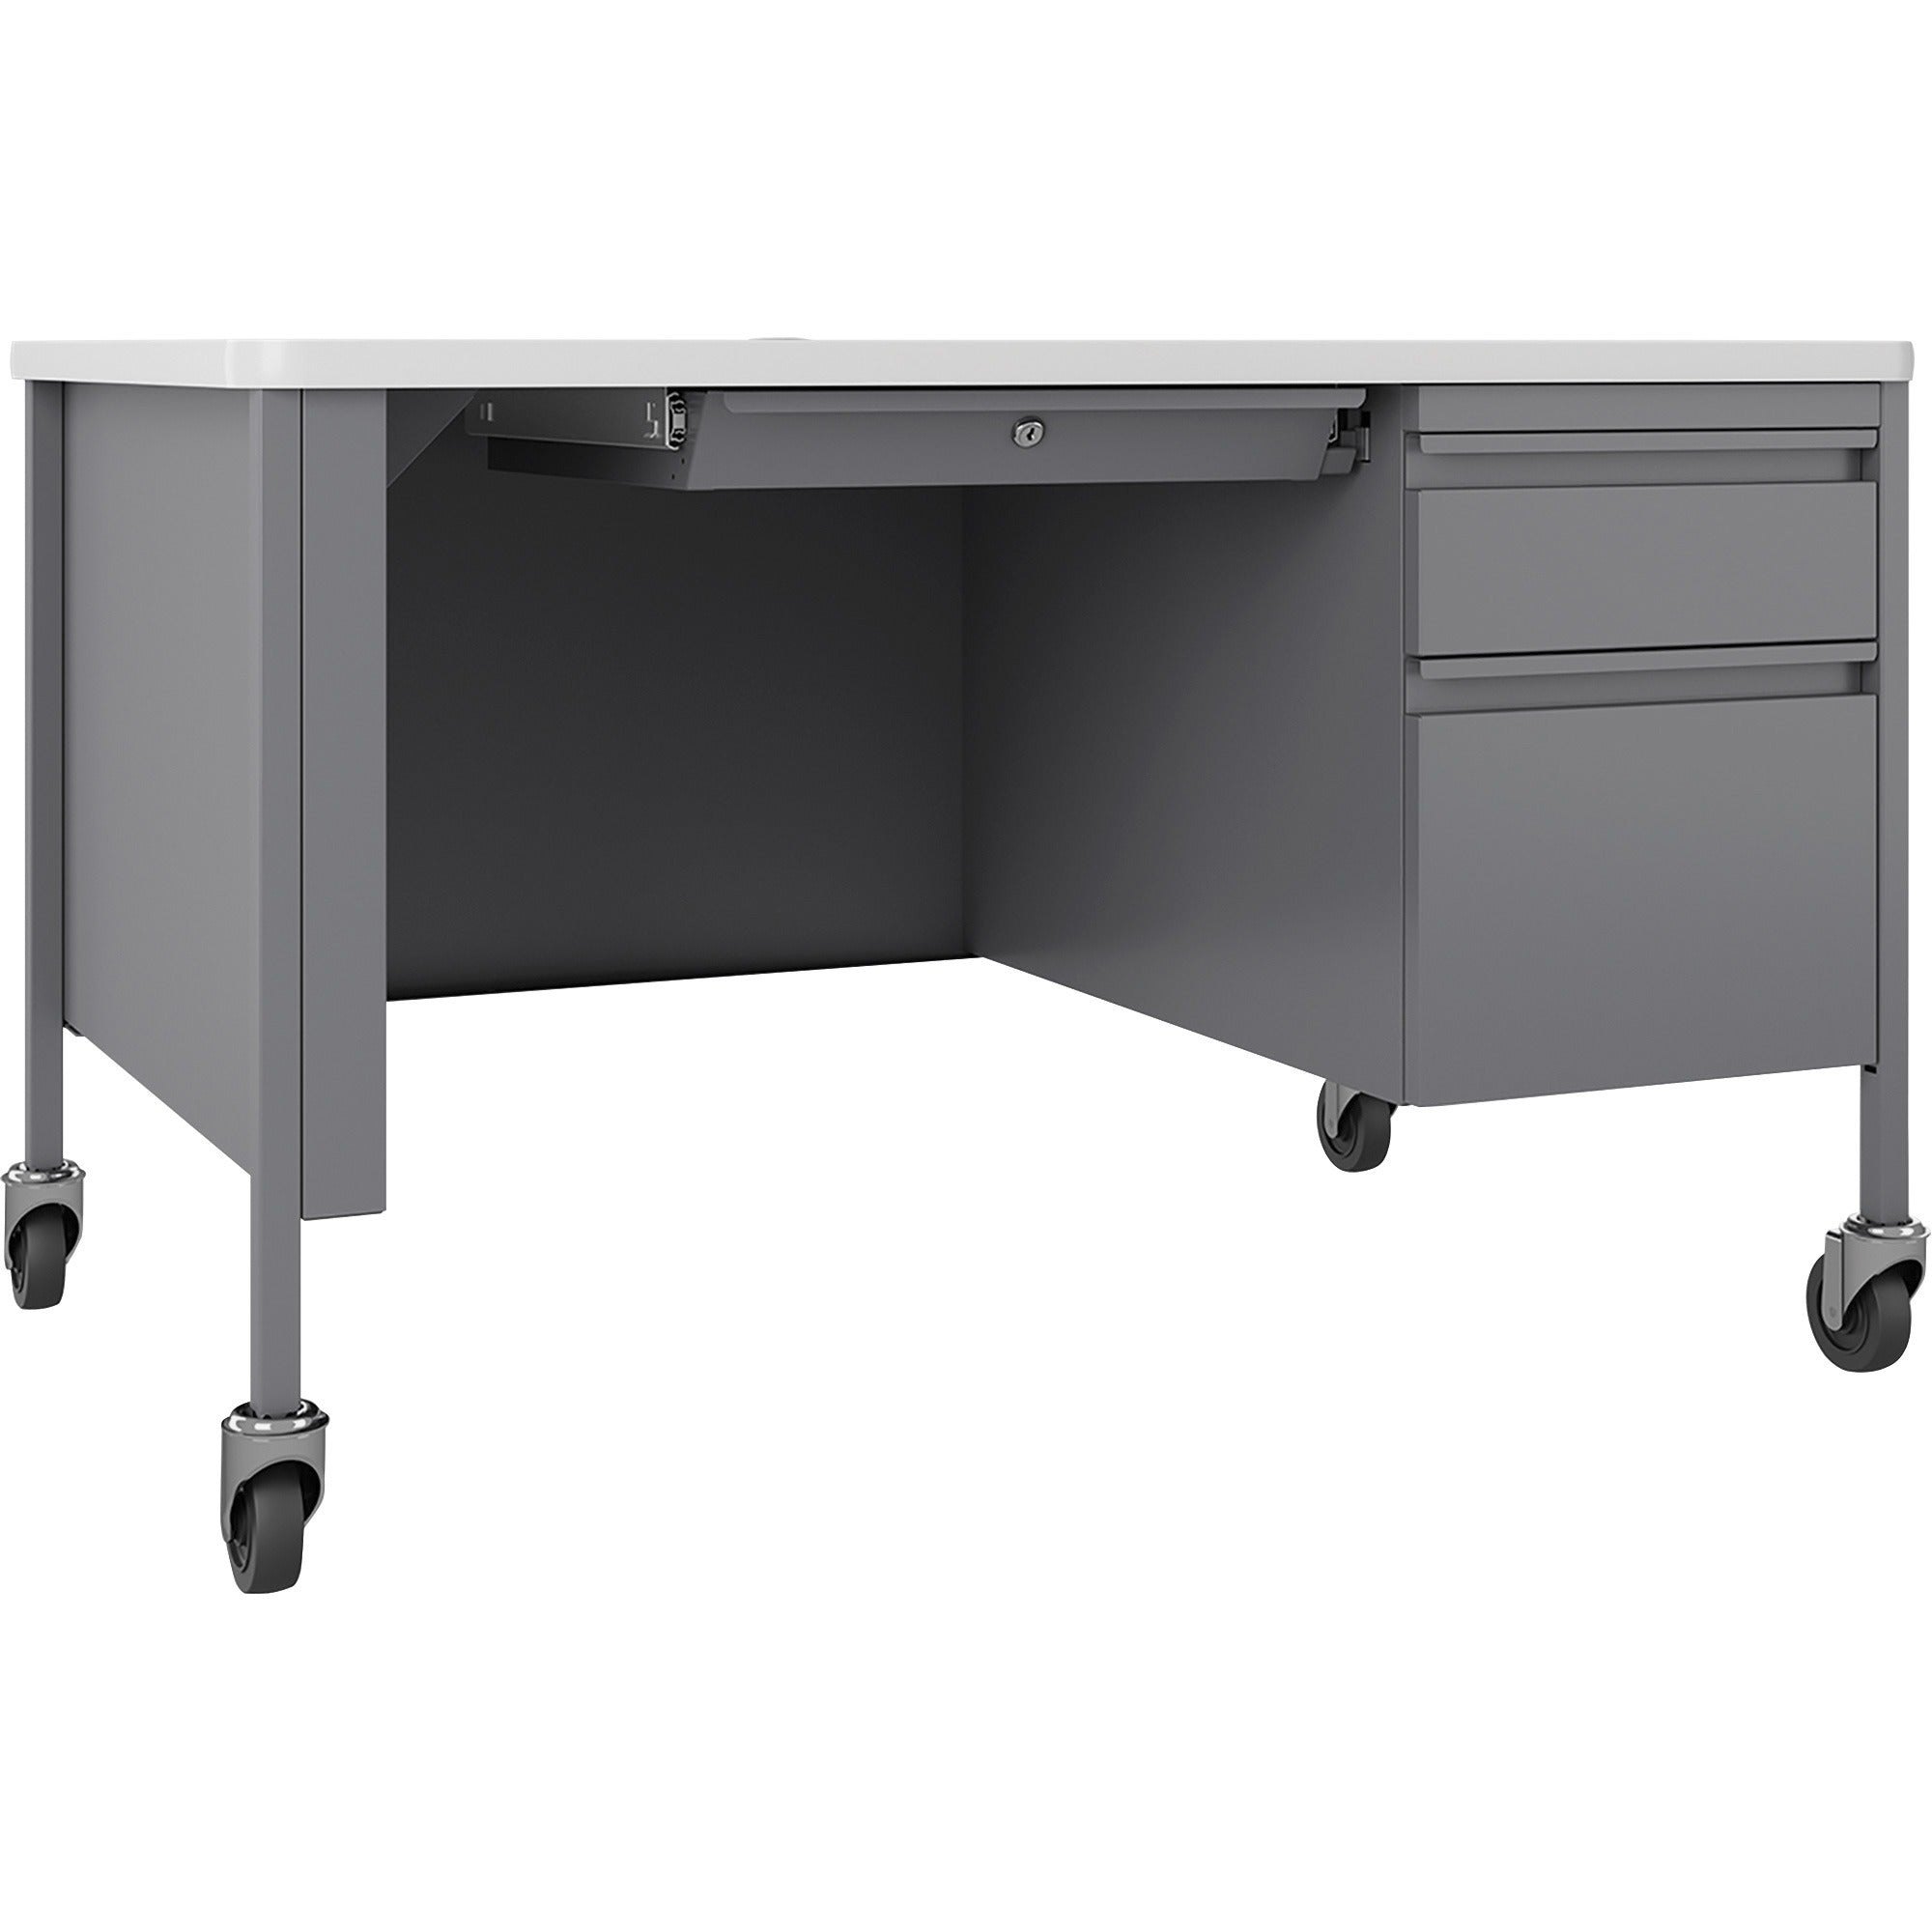 lorell-fortress-series-48-mobile-right-pedestal-teachers-desk-48-x-30295-box-file-drawers-single-pedestal-on-right-side-t-mold-edge-finish-gray_llr66944 - 1